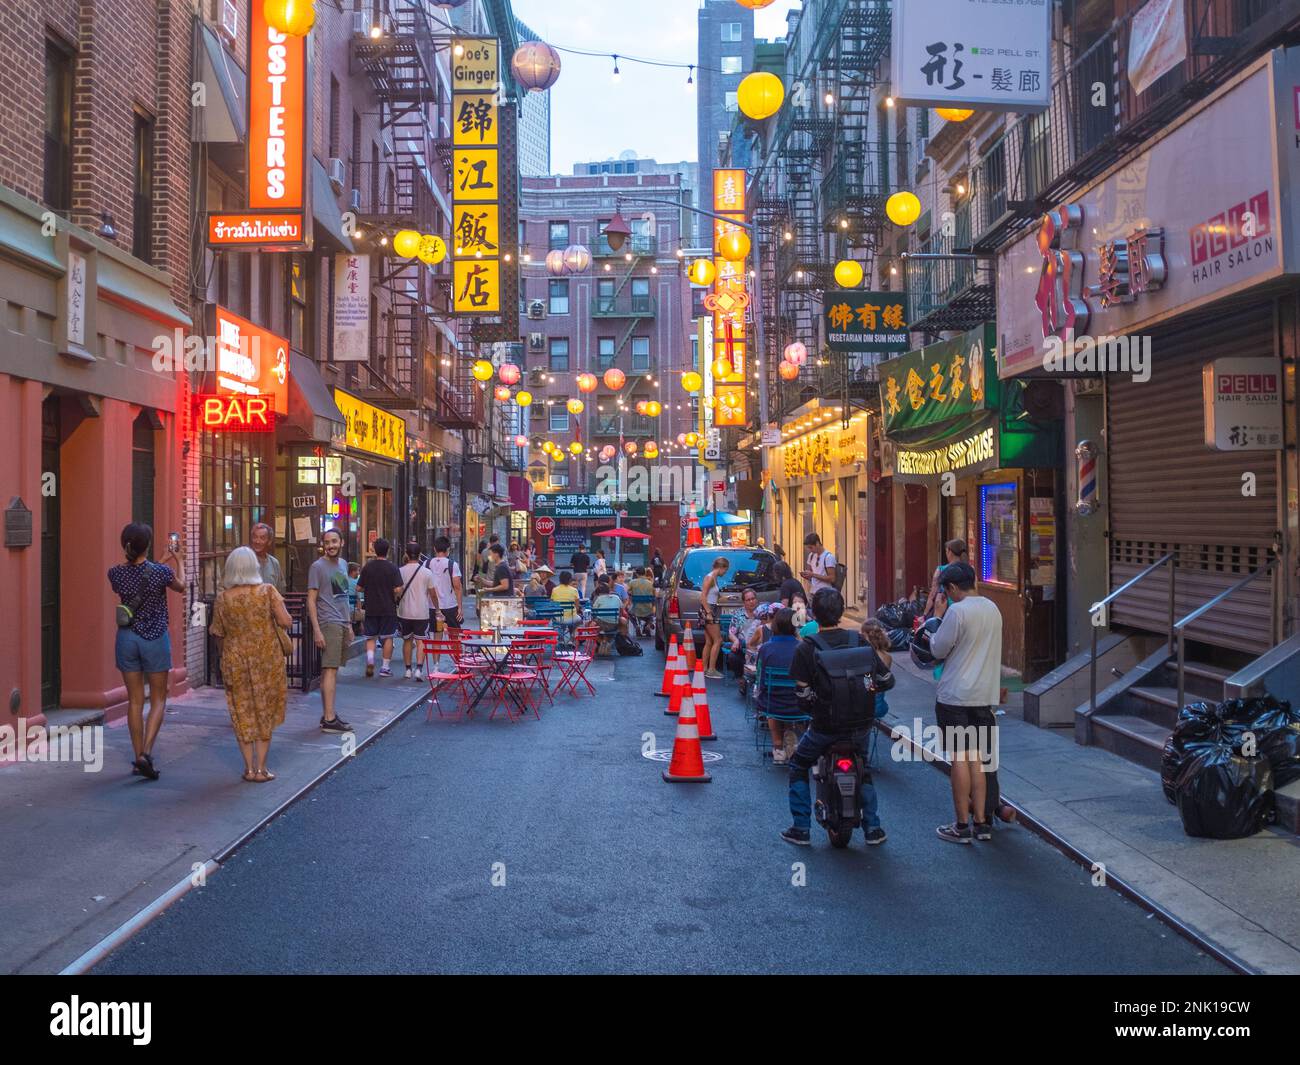 New York City, United States - August 21, 2022: A street of the Chinatown of New York City at dawn with lights and lanterns switched on and some peopl Stock Photo